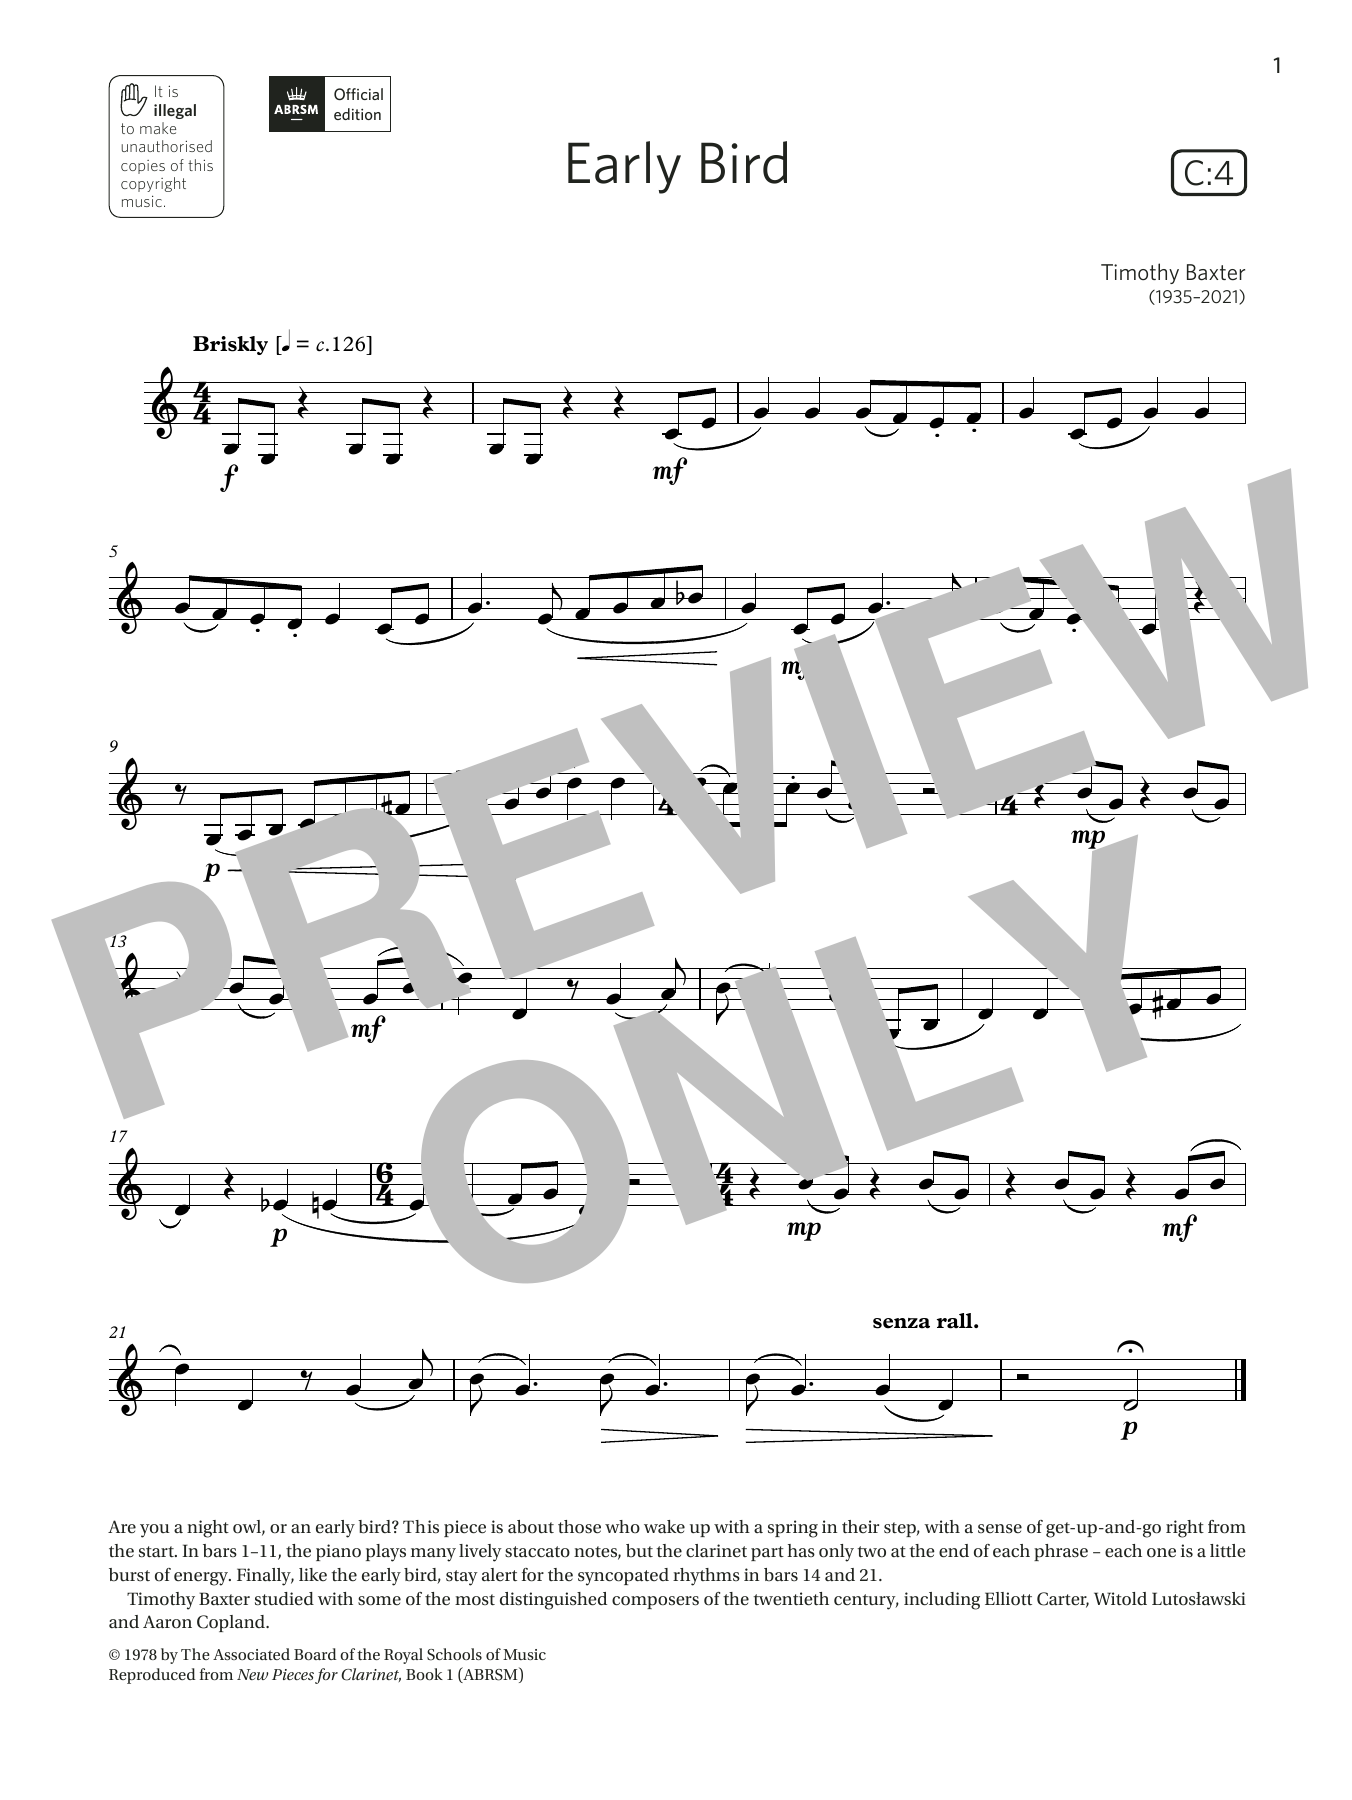 Download Timothy Baxter Early Bird (Grade 3 List C4 from the AB Sheet Music